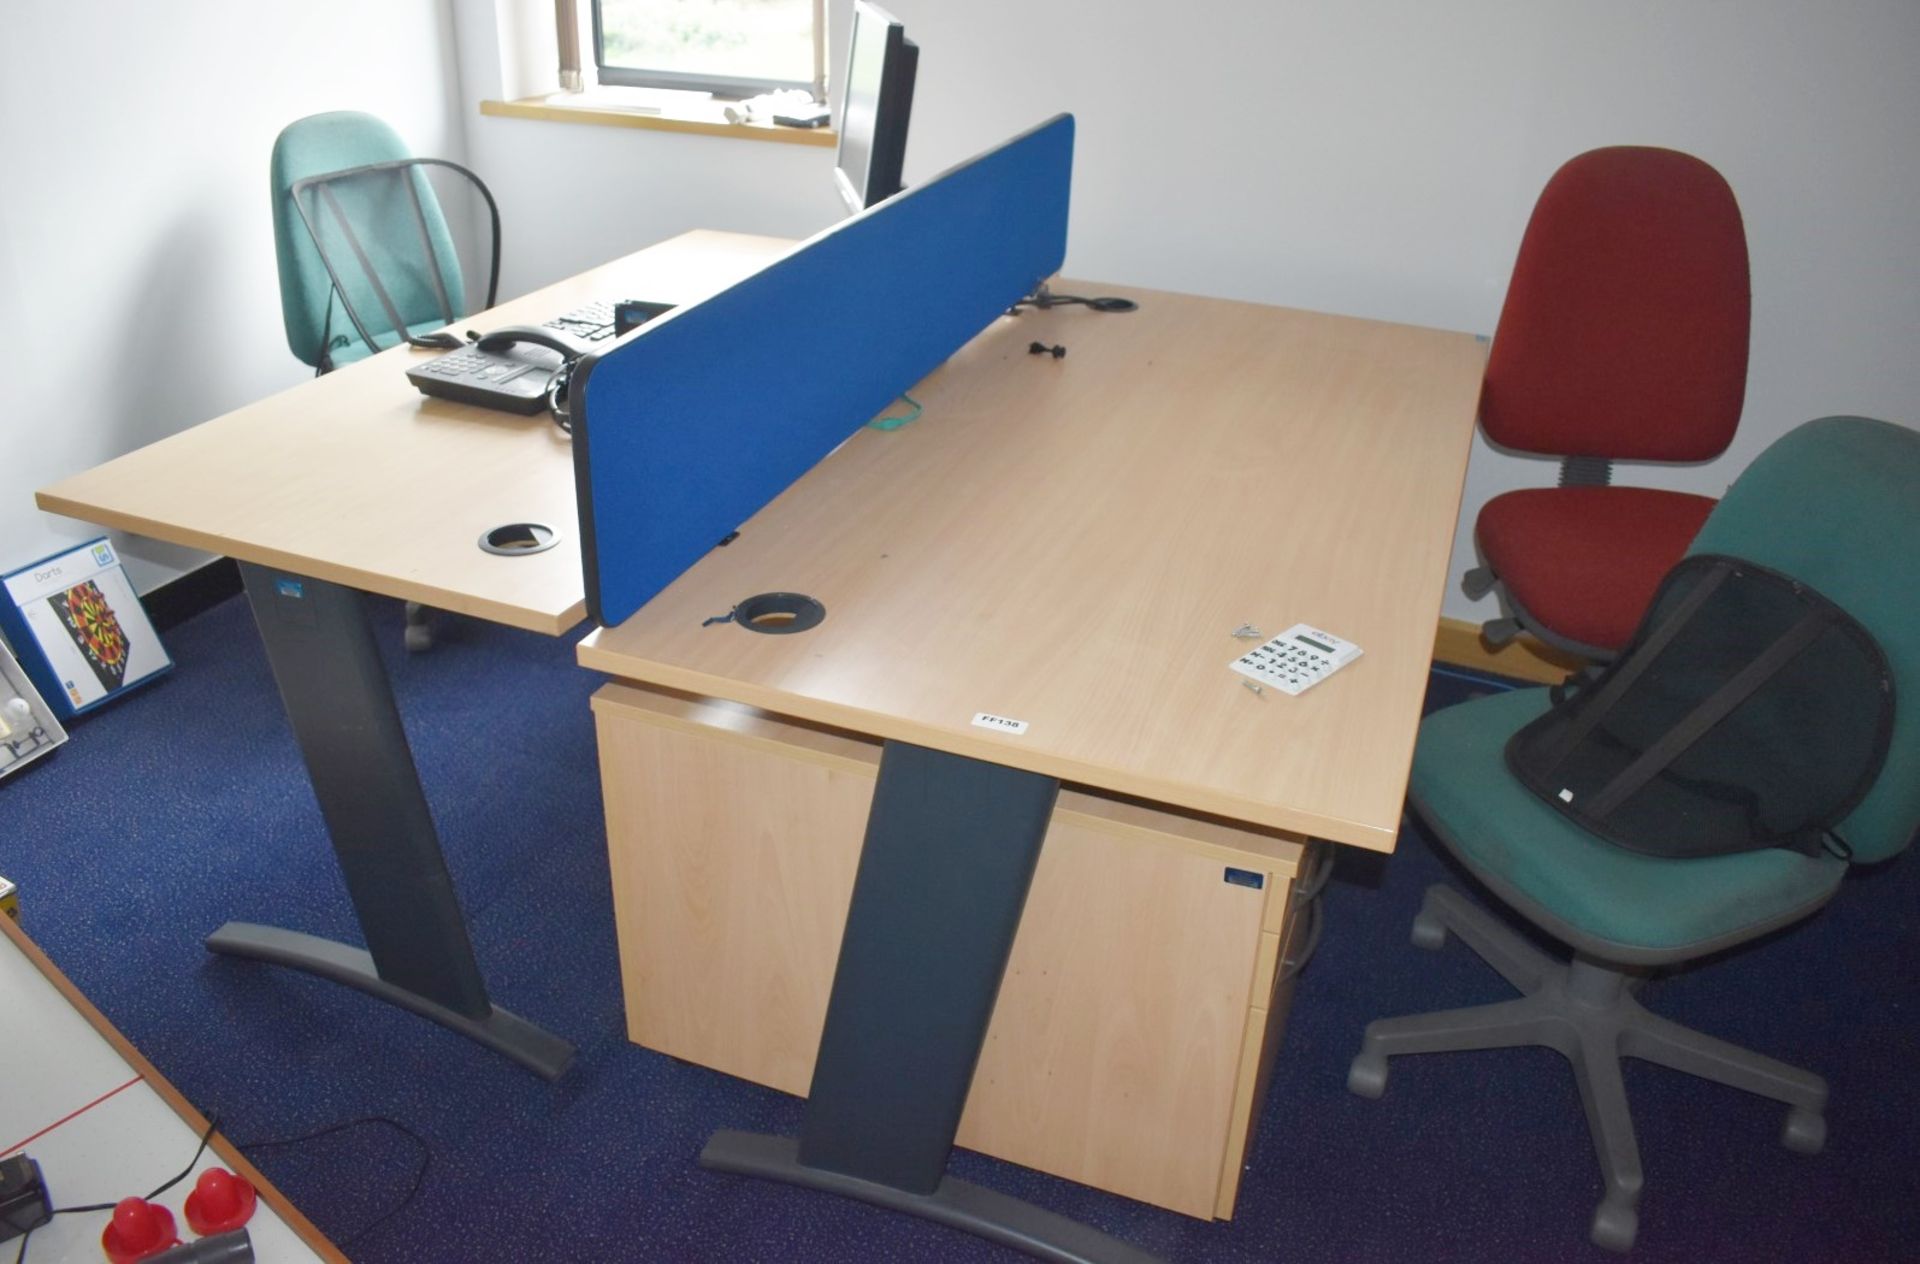 1 x Assorted Collection of Office Furniture - Includes 2 x 160cm Office Desks, 3 x Swivel Chairs,